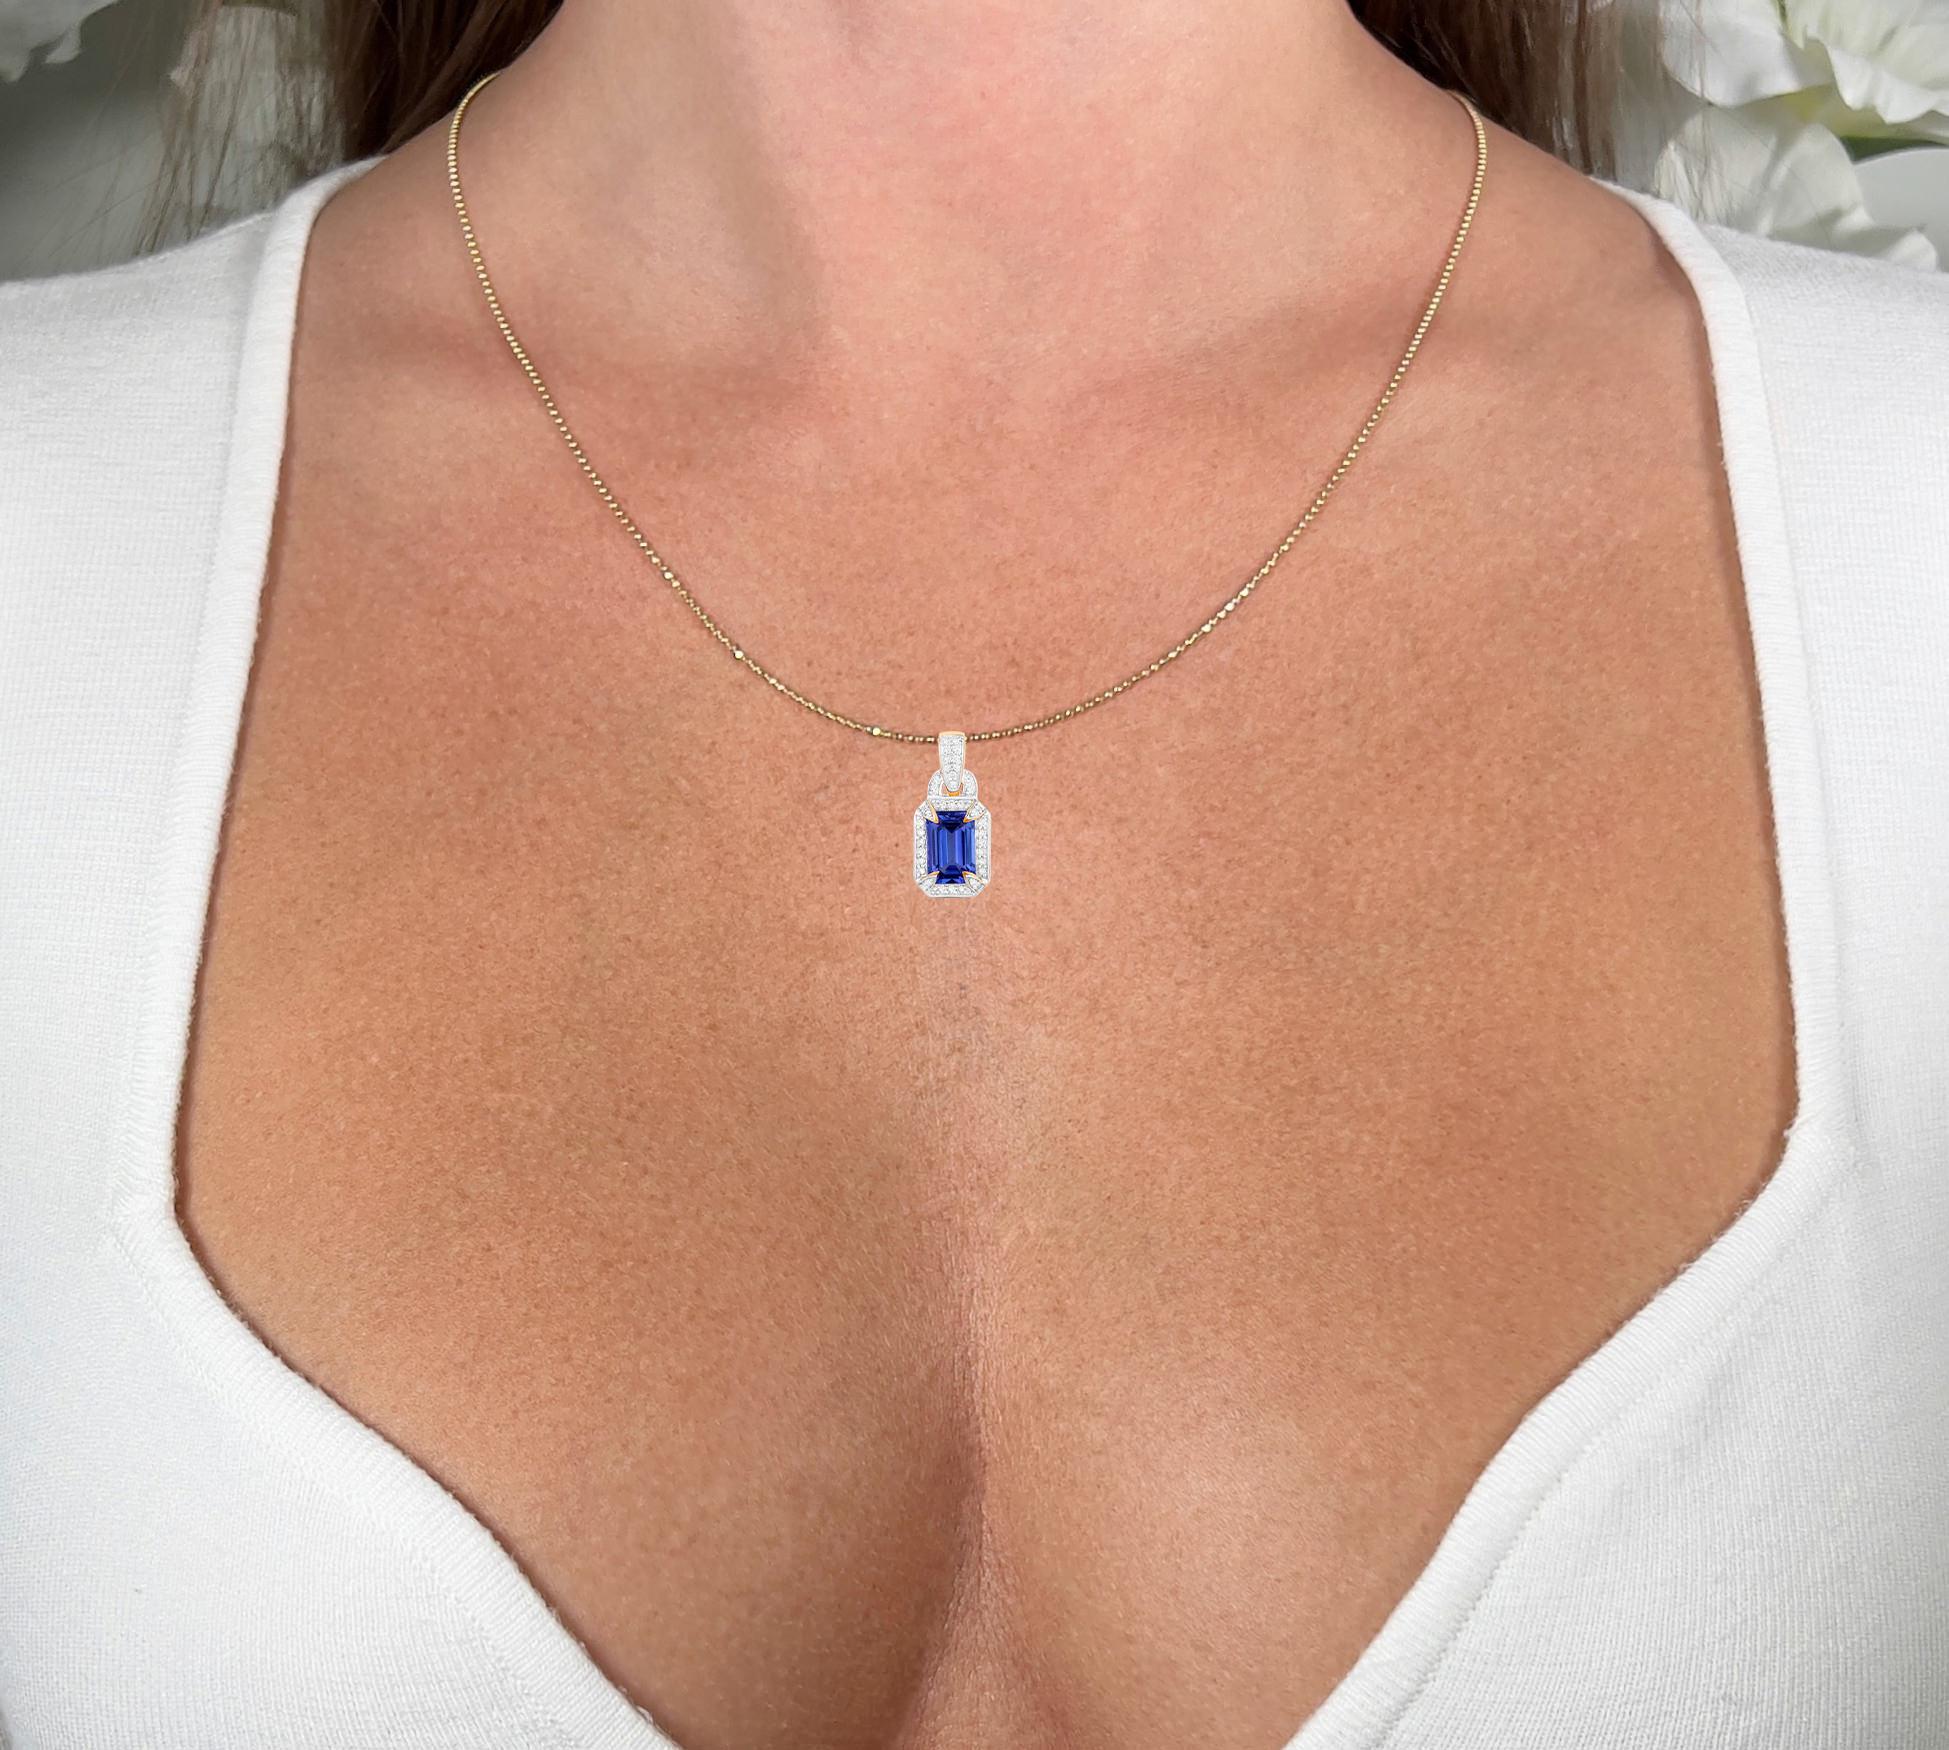 It comes with the Gemological Appraisal by GIA GG/AJP
All Gemstones are Natural
Tanzanite = 1.91 Carat
40 Diamonds = 0.18 Carats
Metal: 14K Yellow Gold
Pendant Dimensions: 22 x 9 mm